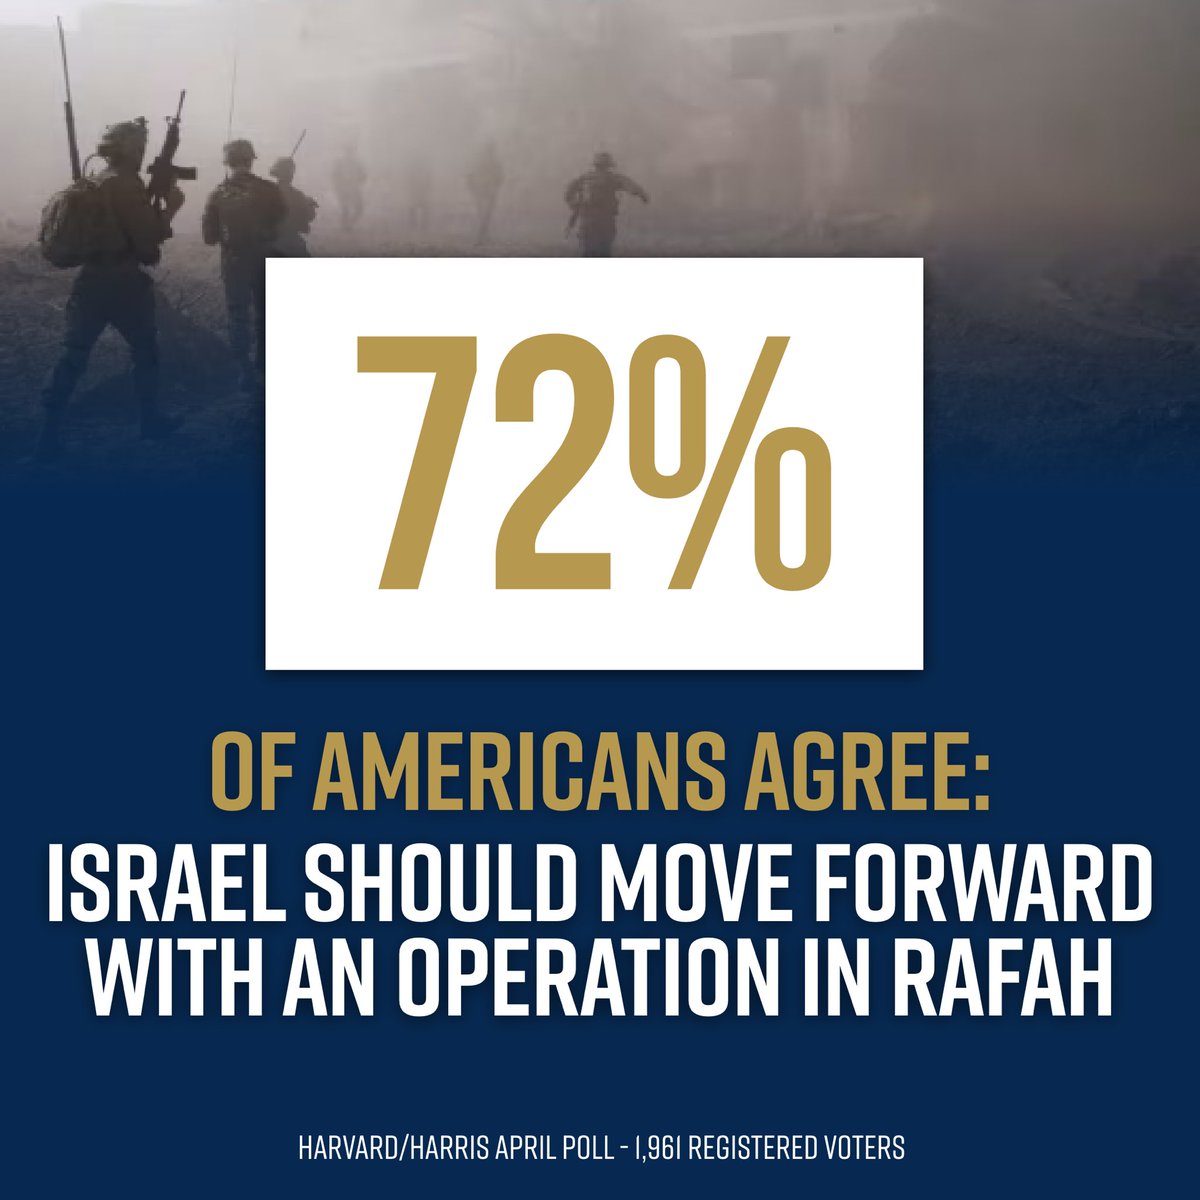 72% of Americans support Israel conducting this operation in Rafah to drive Hamas from power.